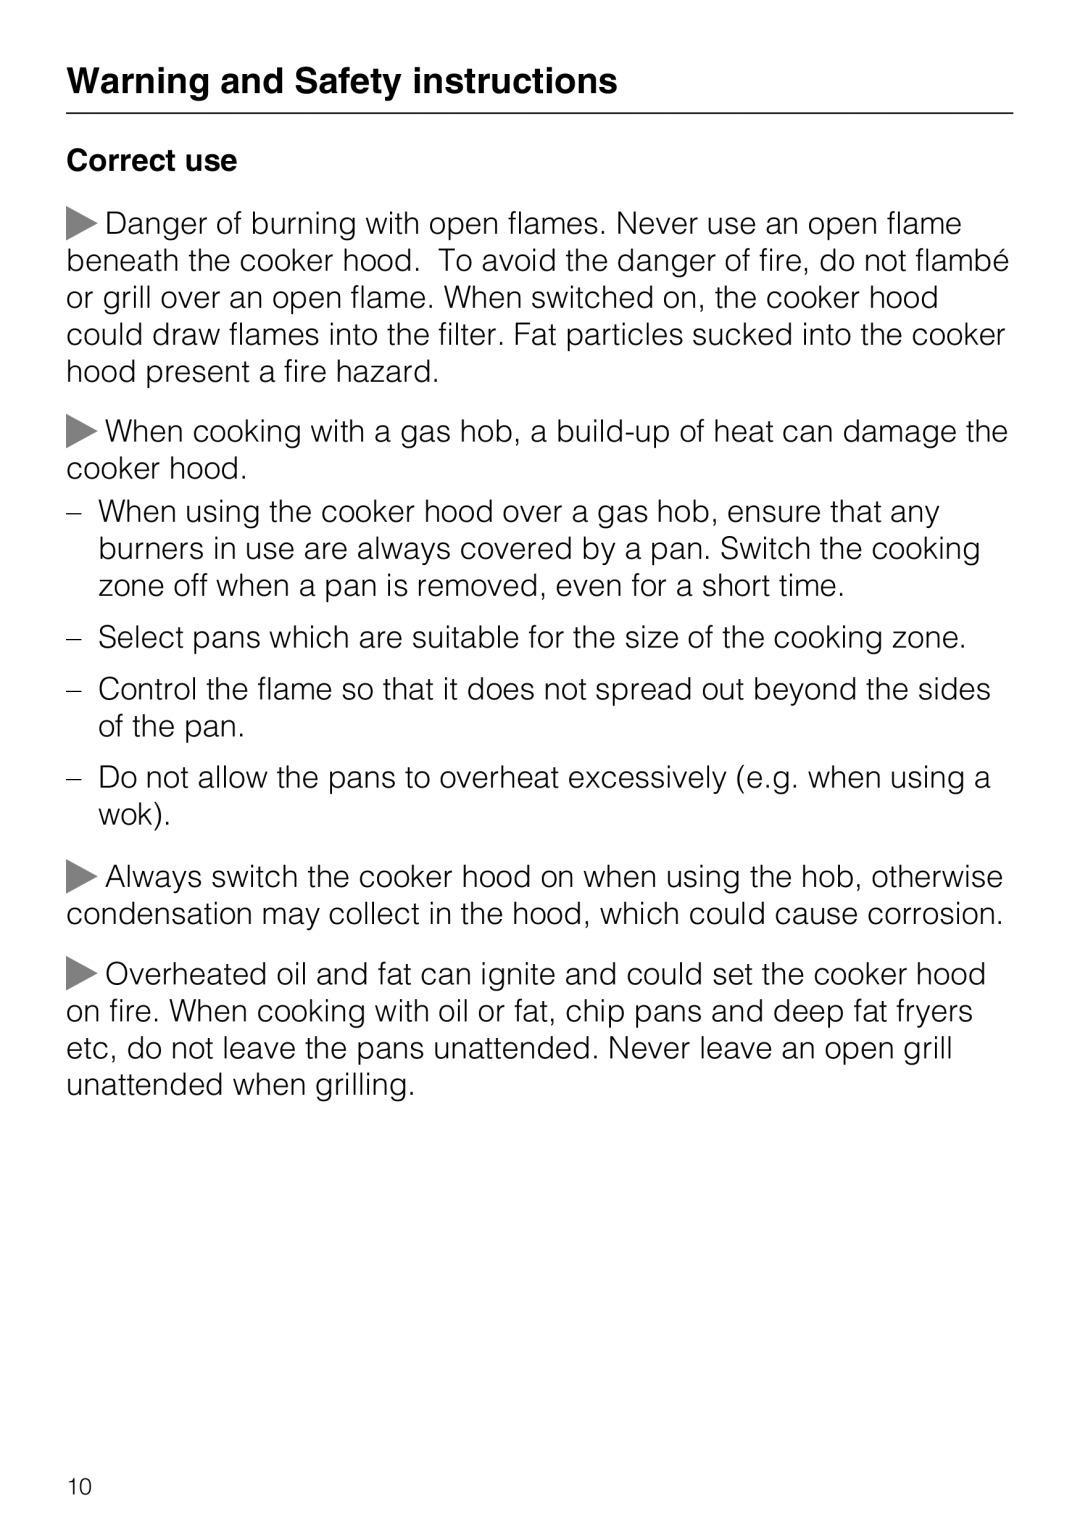 Miele 09 730 840 installation instructions Correct use, Warning and Safety instructions 